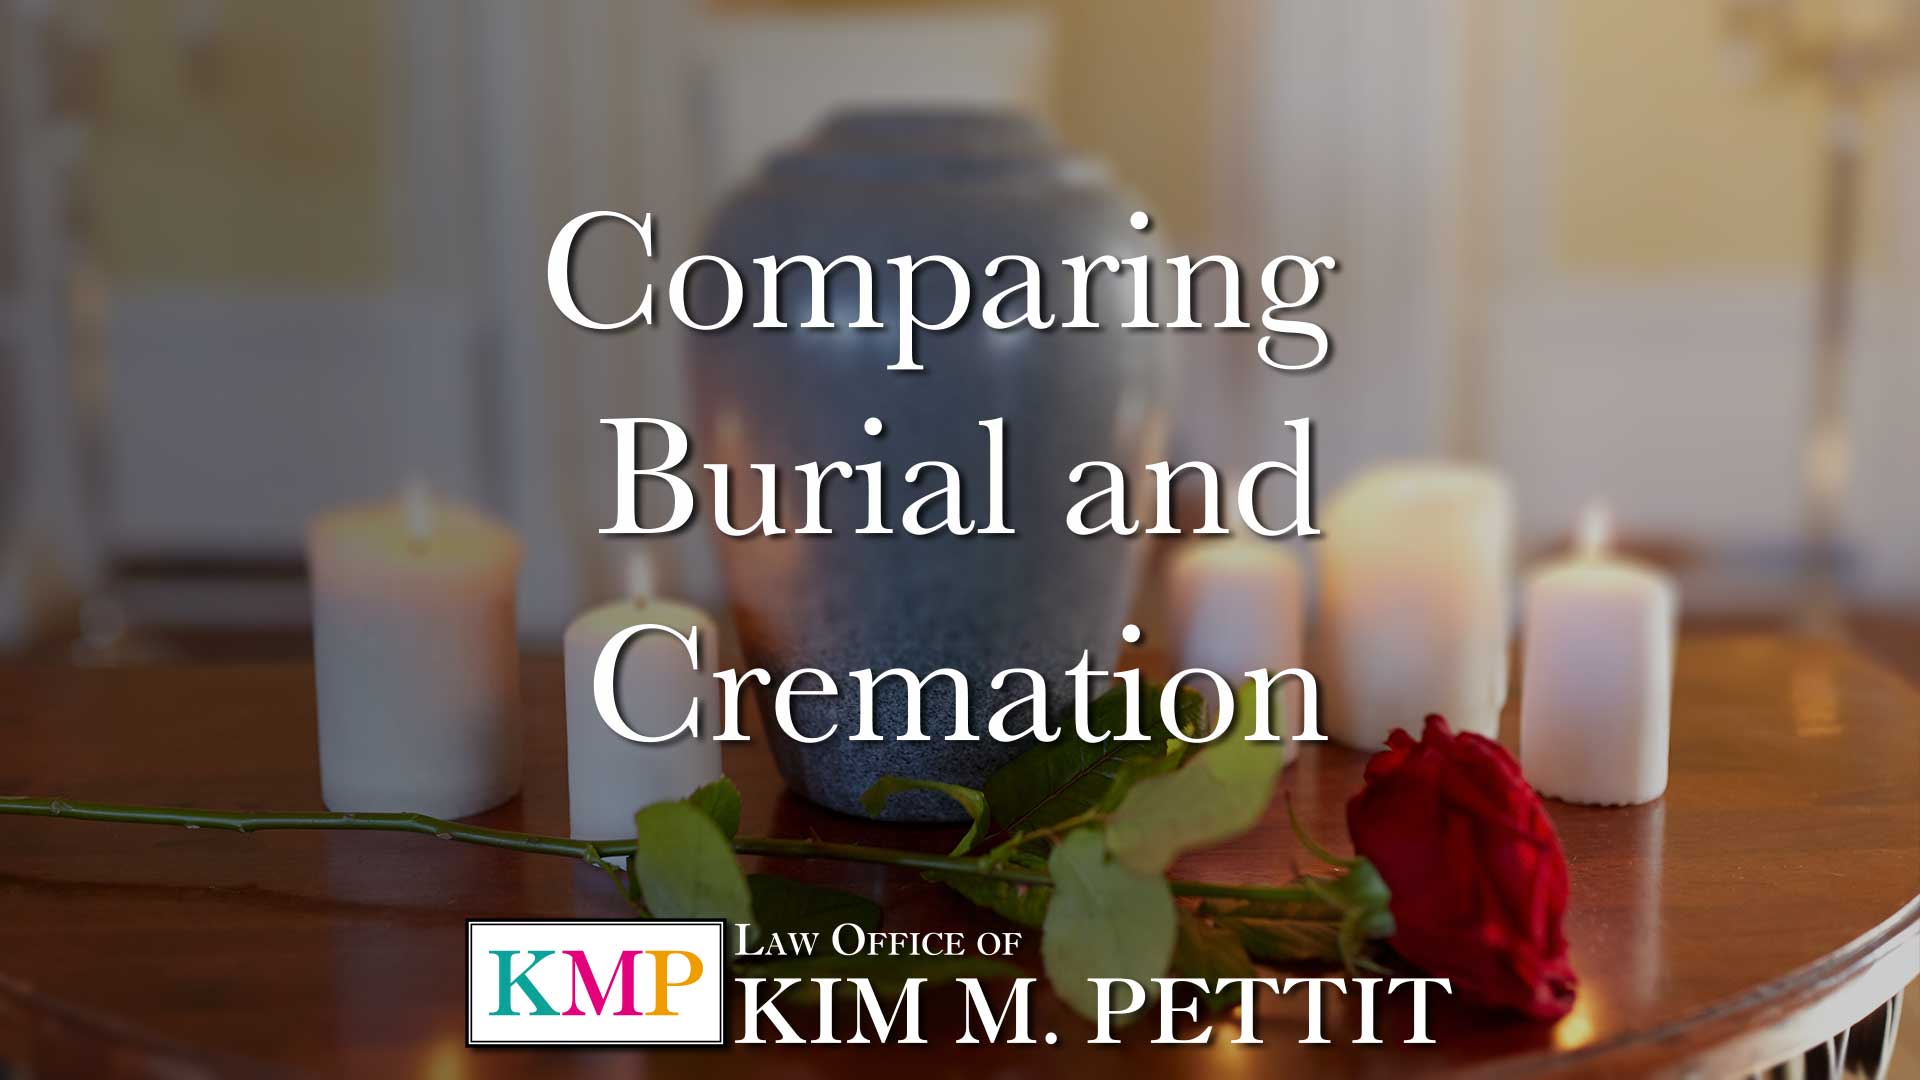 Comparing Burial and Cremation - Kim Pettit Family Law